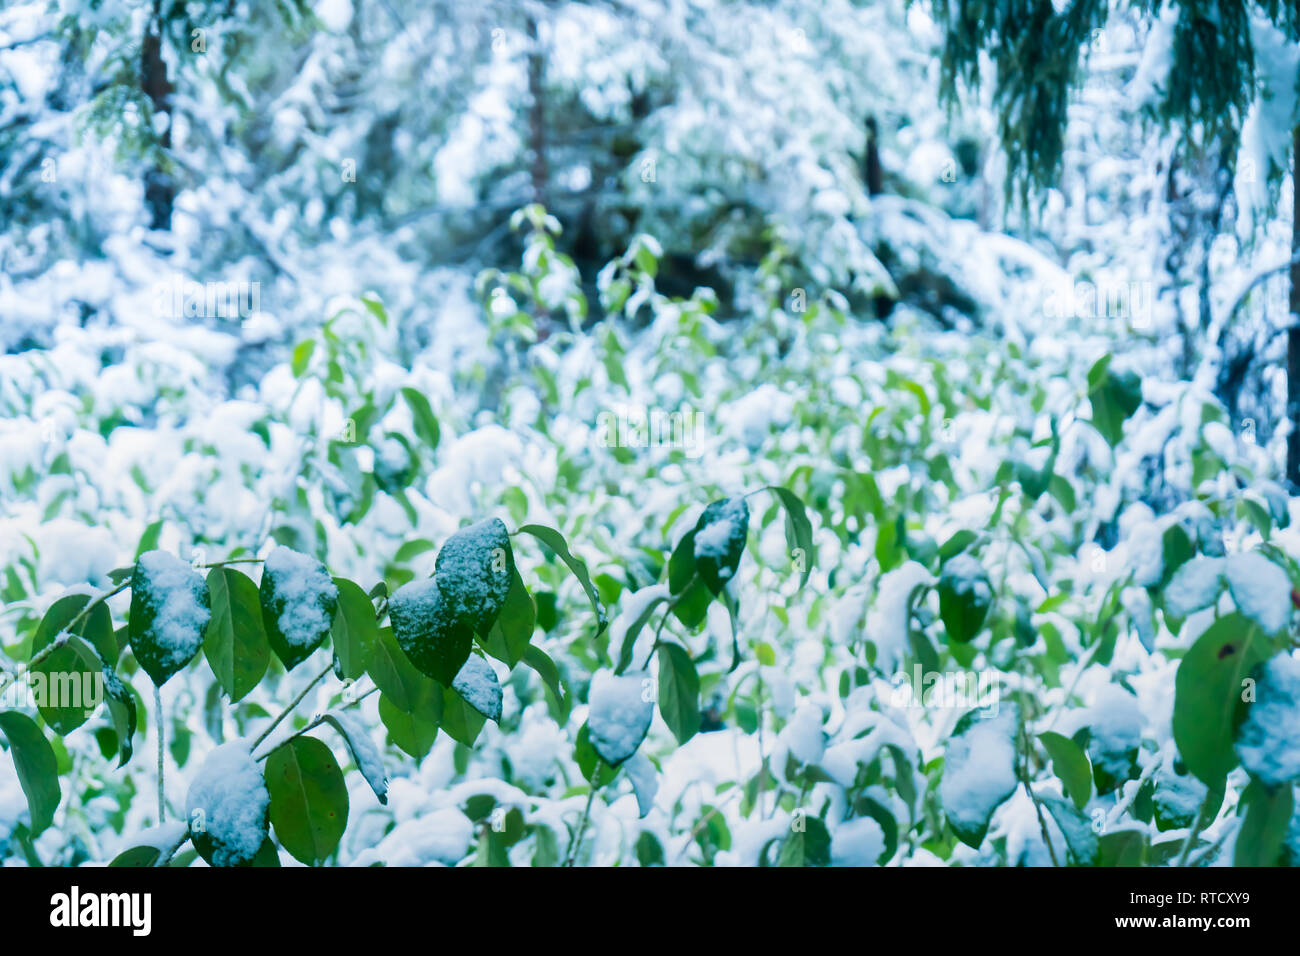 Bright green leaves on a forest floor covered in snow after a snow storm in winter, with evergreen trees blurred in the background. Stock Photo